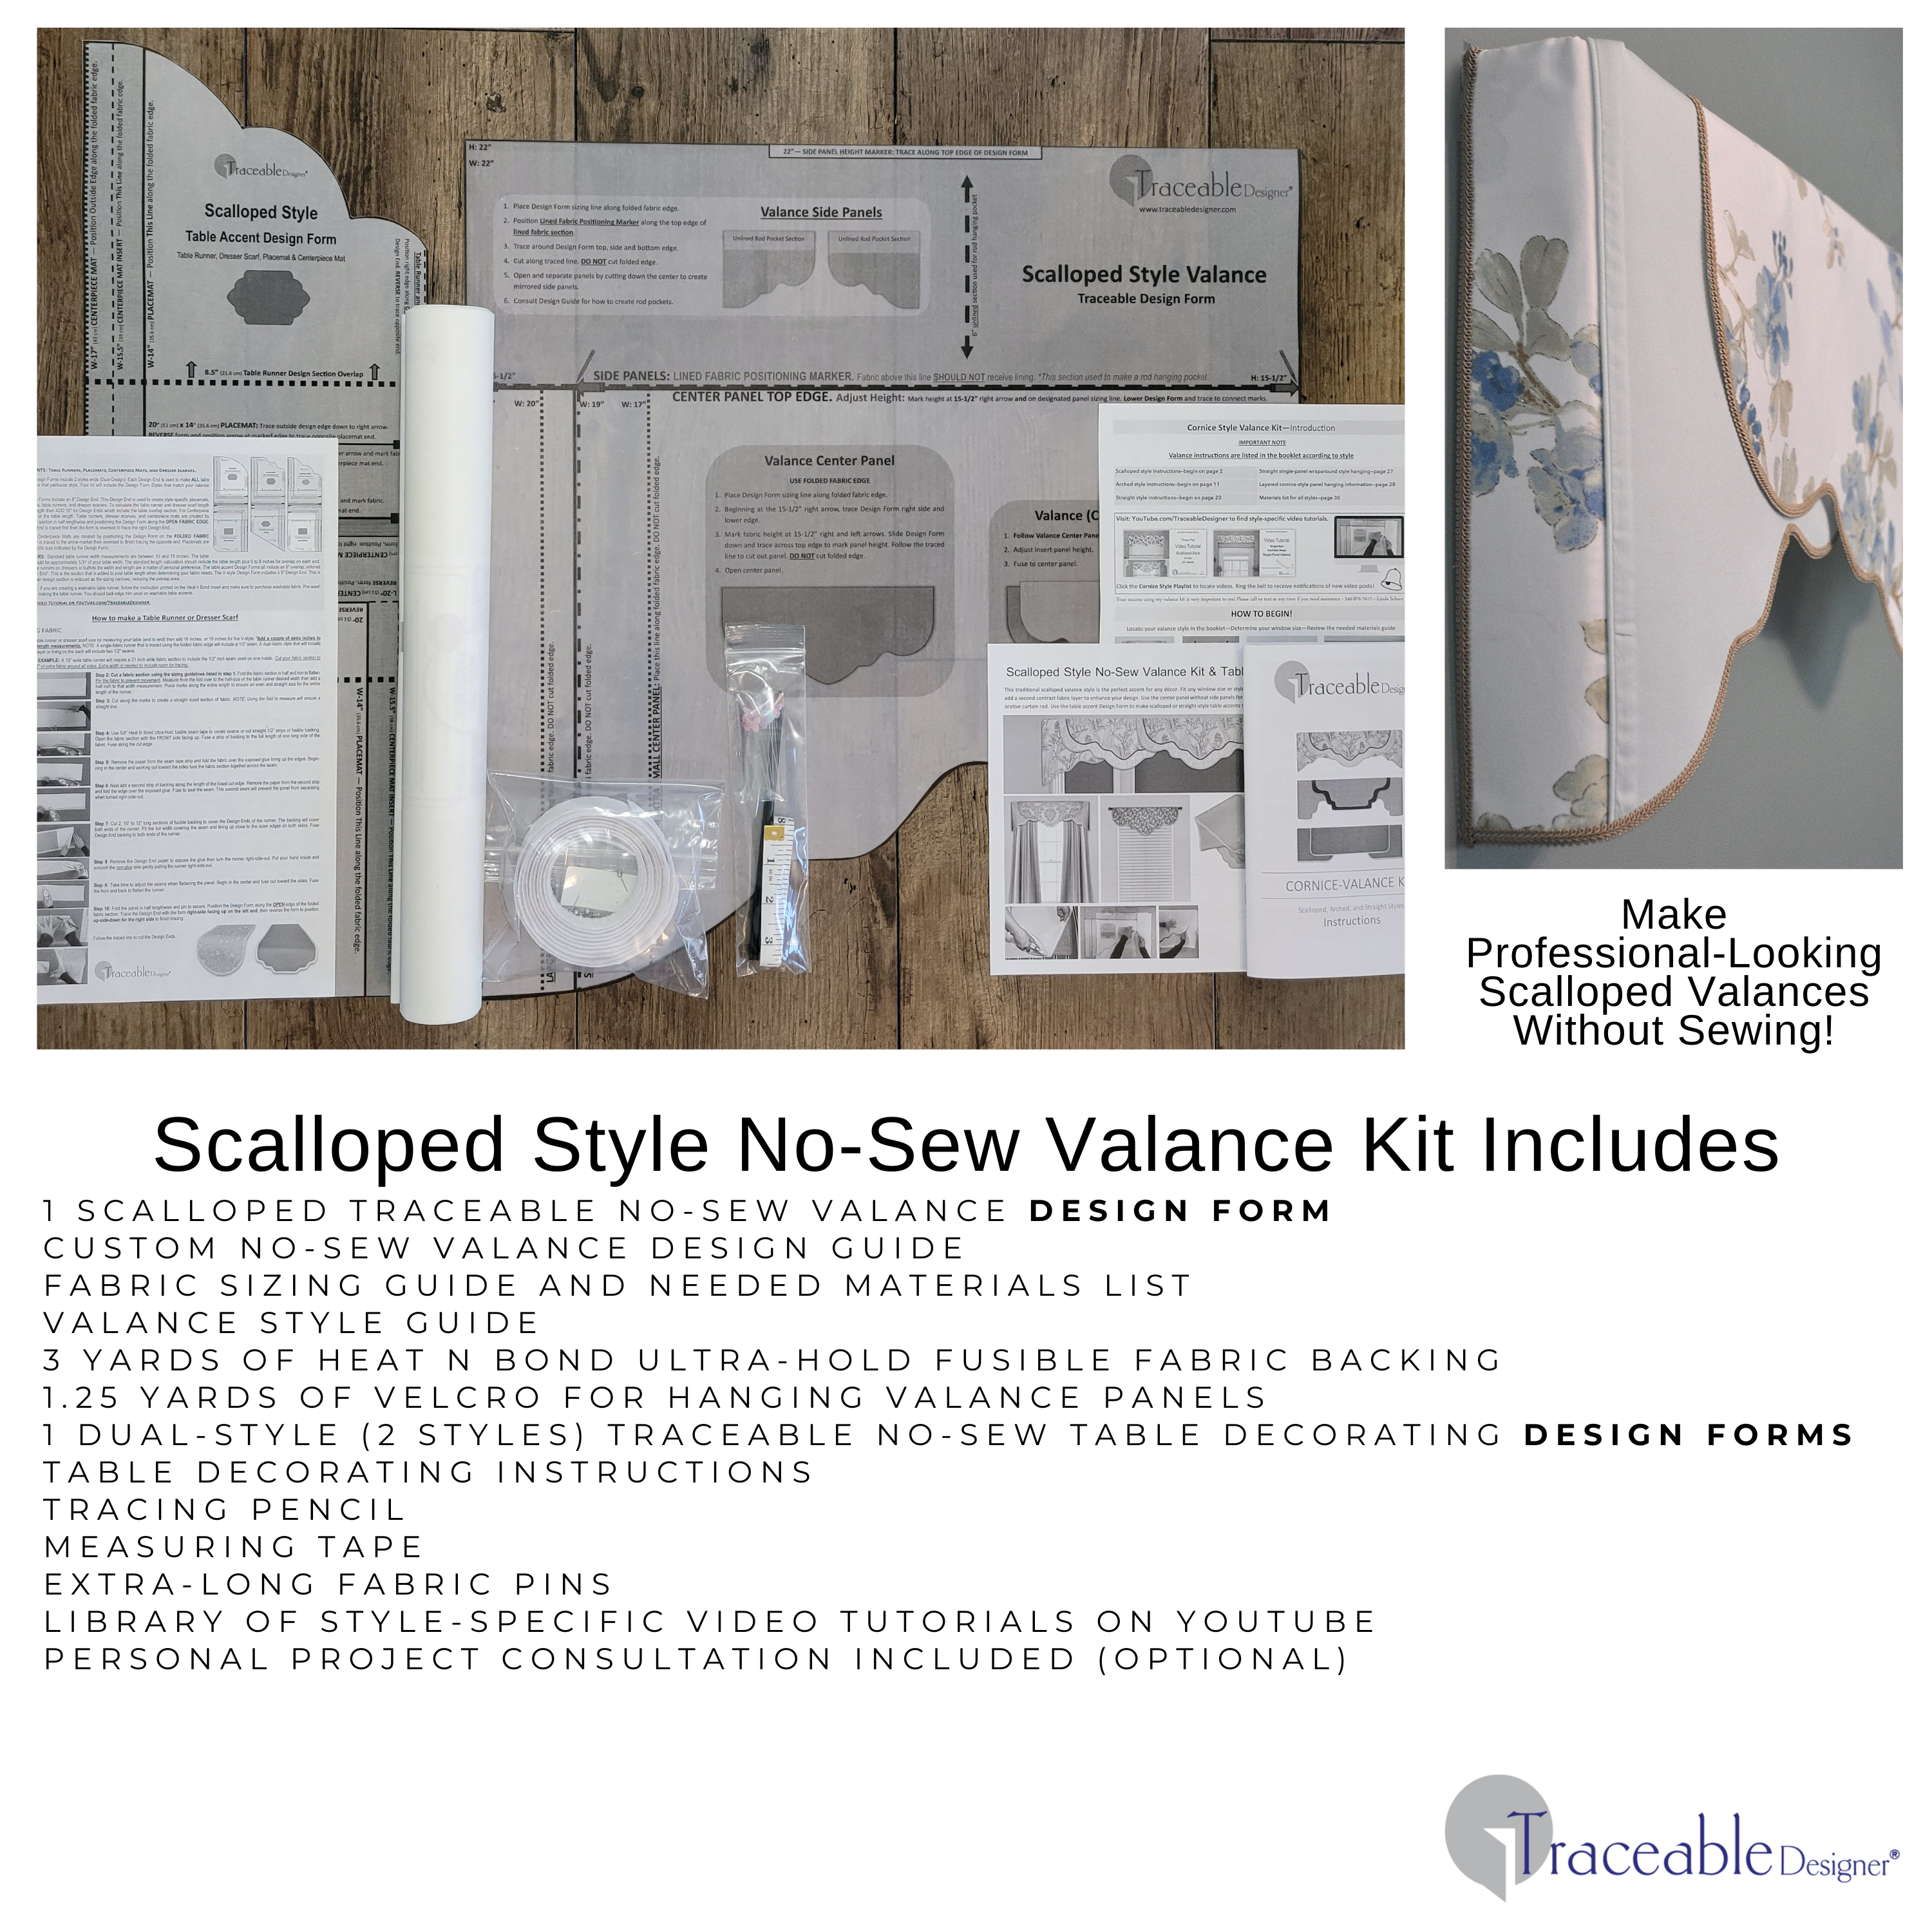 Traceable Designer scalloped style no-sew cornice valance kit inlcudes traceable valance design forms used to make custom valances without sewing. Use a 2.5" wide pocket curtain rod.